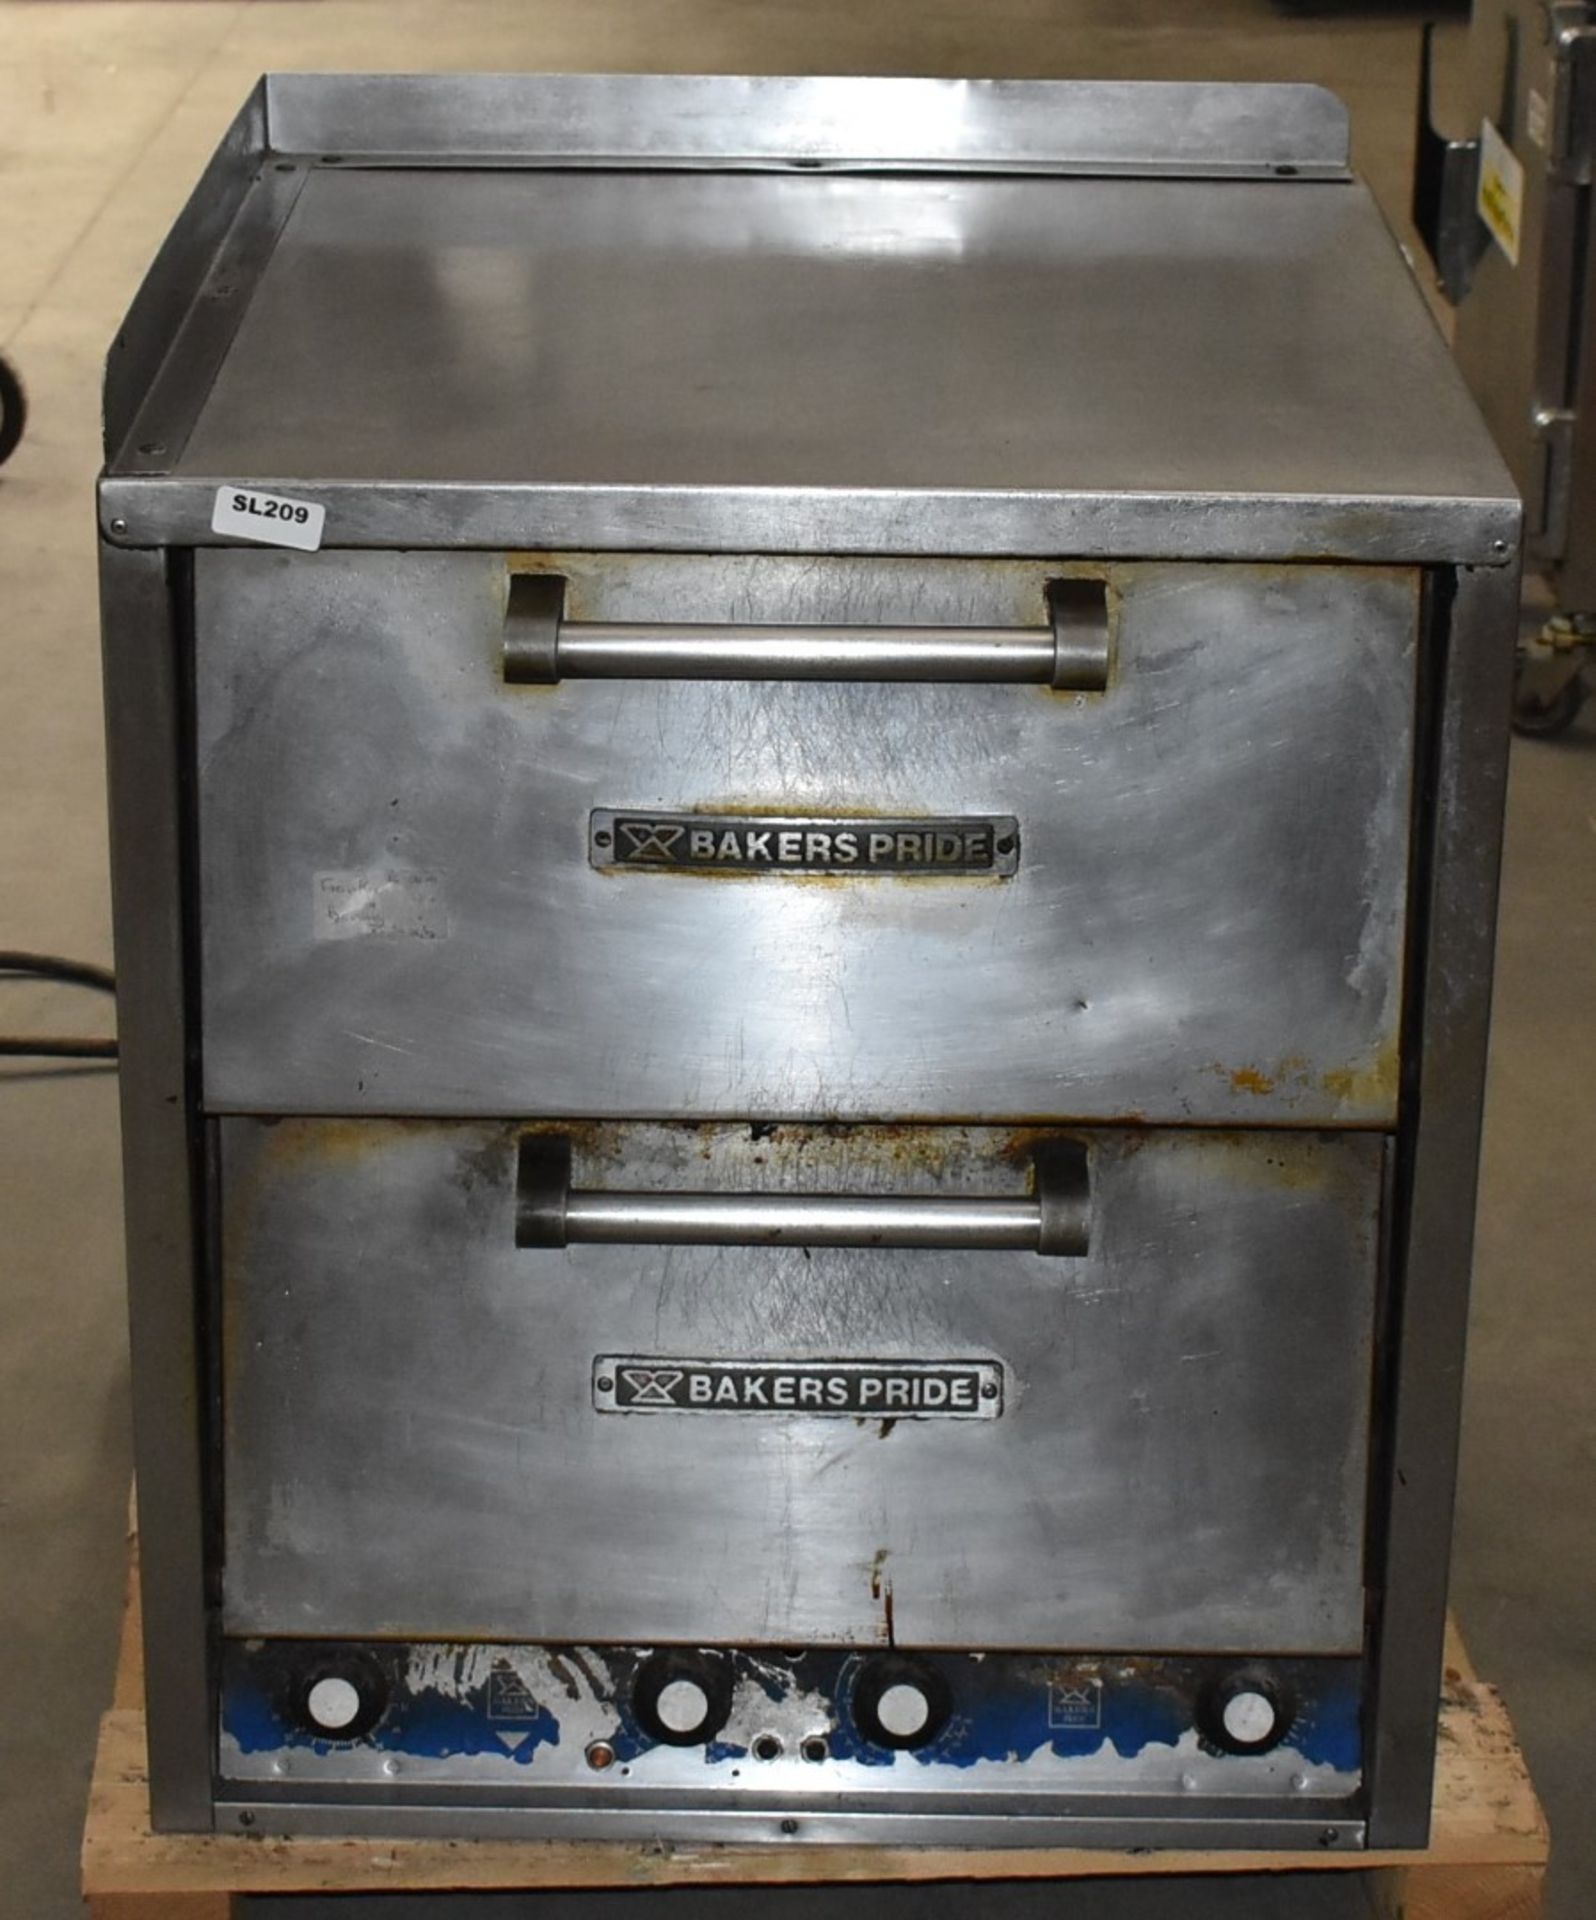 1 x Bakers Pride P46 Electric Pizza Oven - Dimensions: H73 x W66 x D71 cms - CL999 - Ref: SL209 - - Image 2 of 12